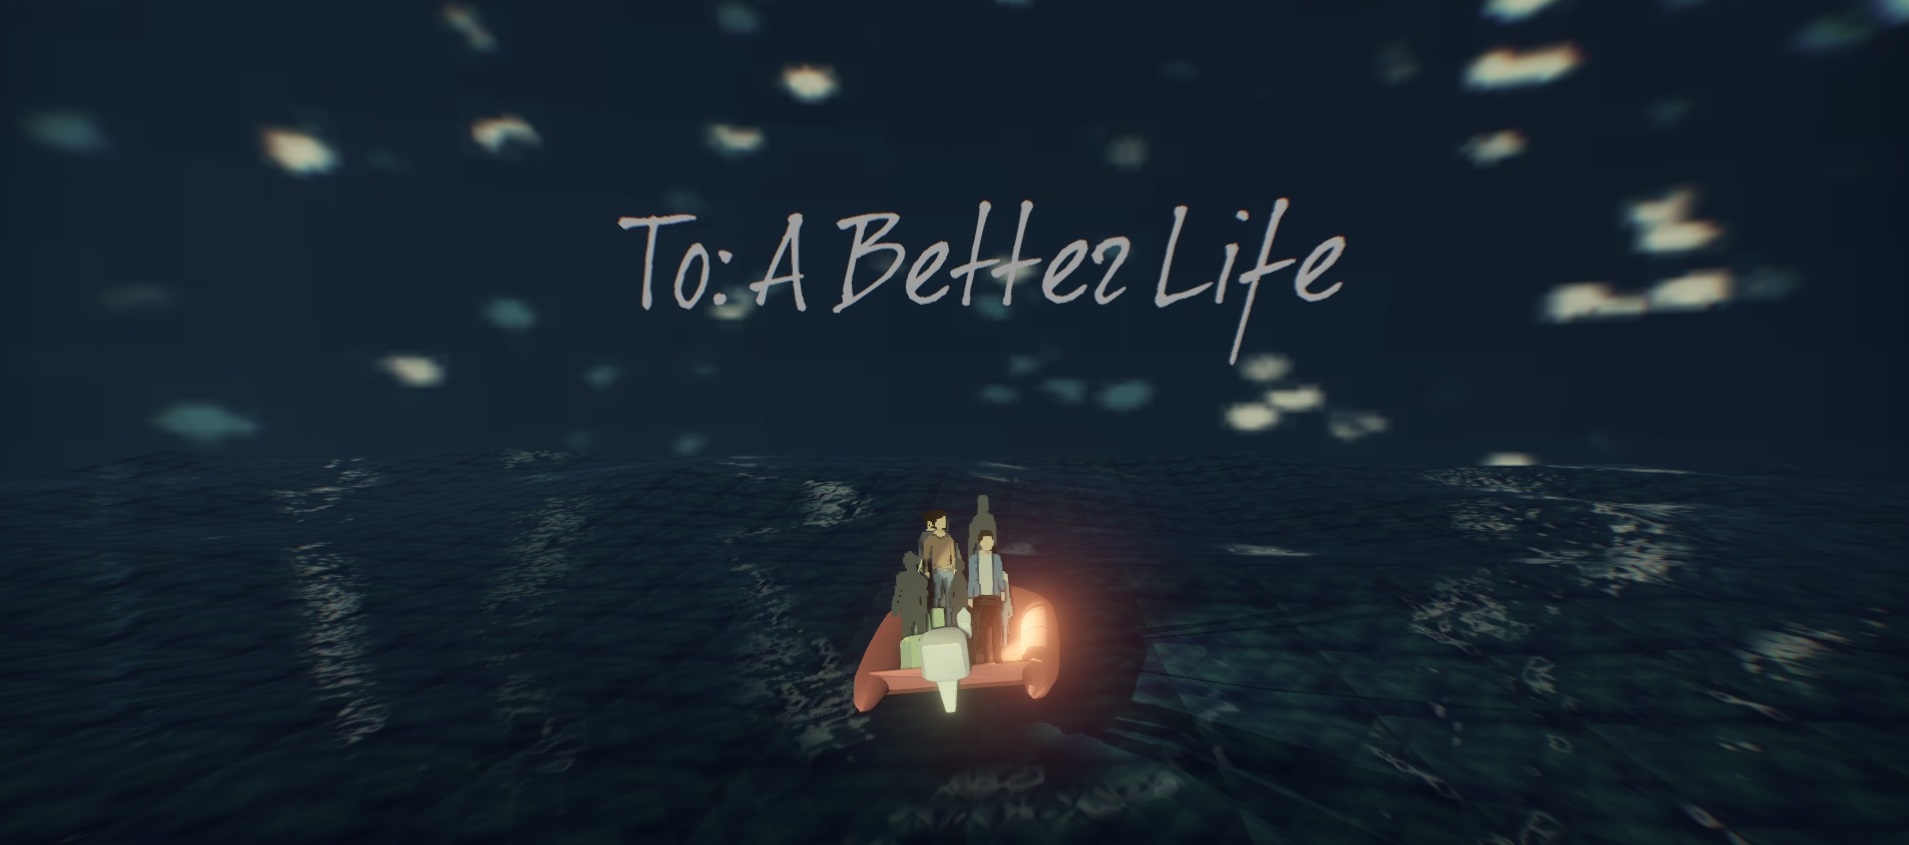 To: A Better Life